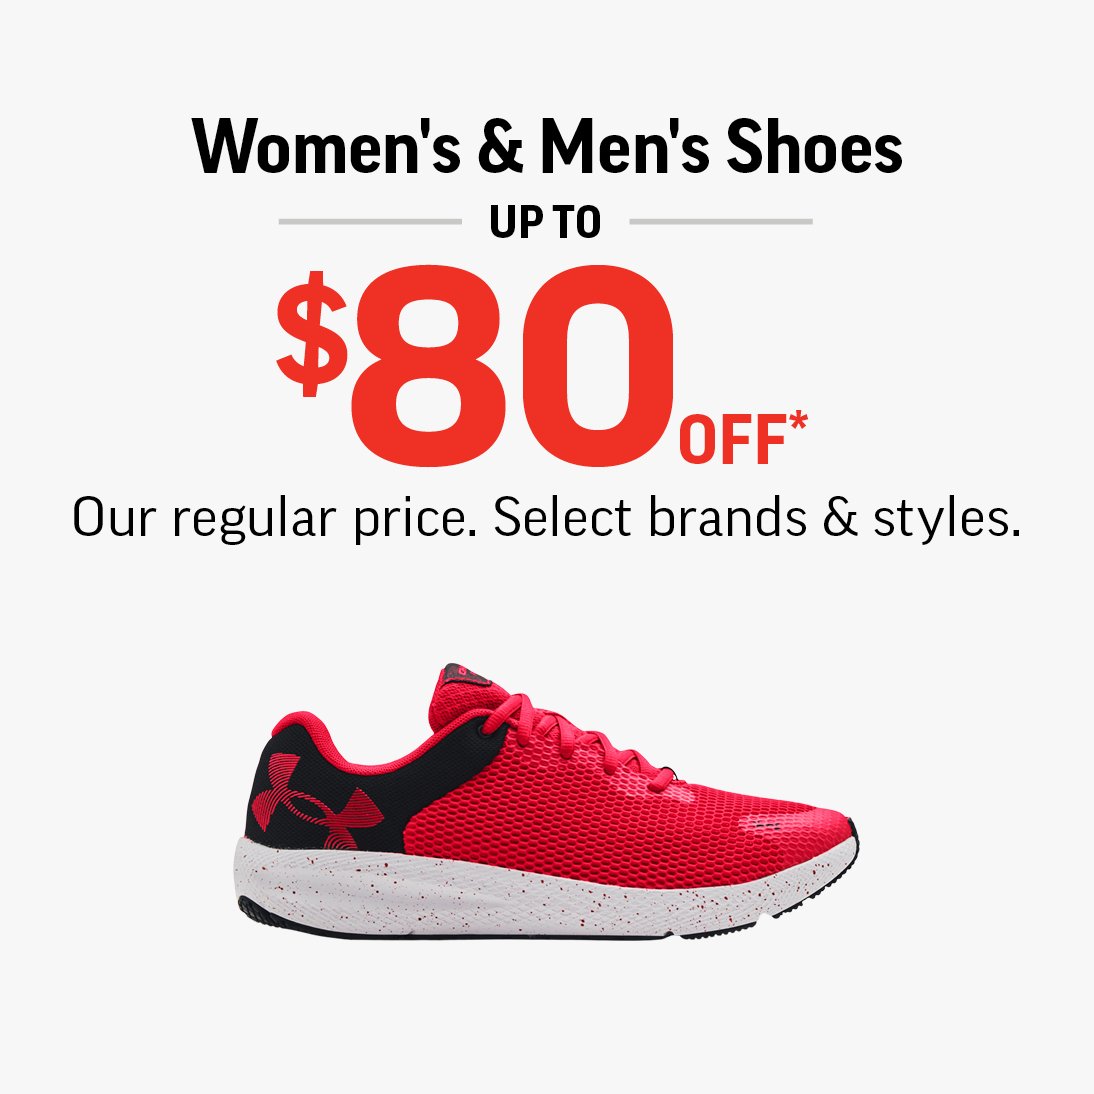 WOMEN'S & MEN'S SHOES UP TO $80 OFF